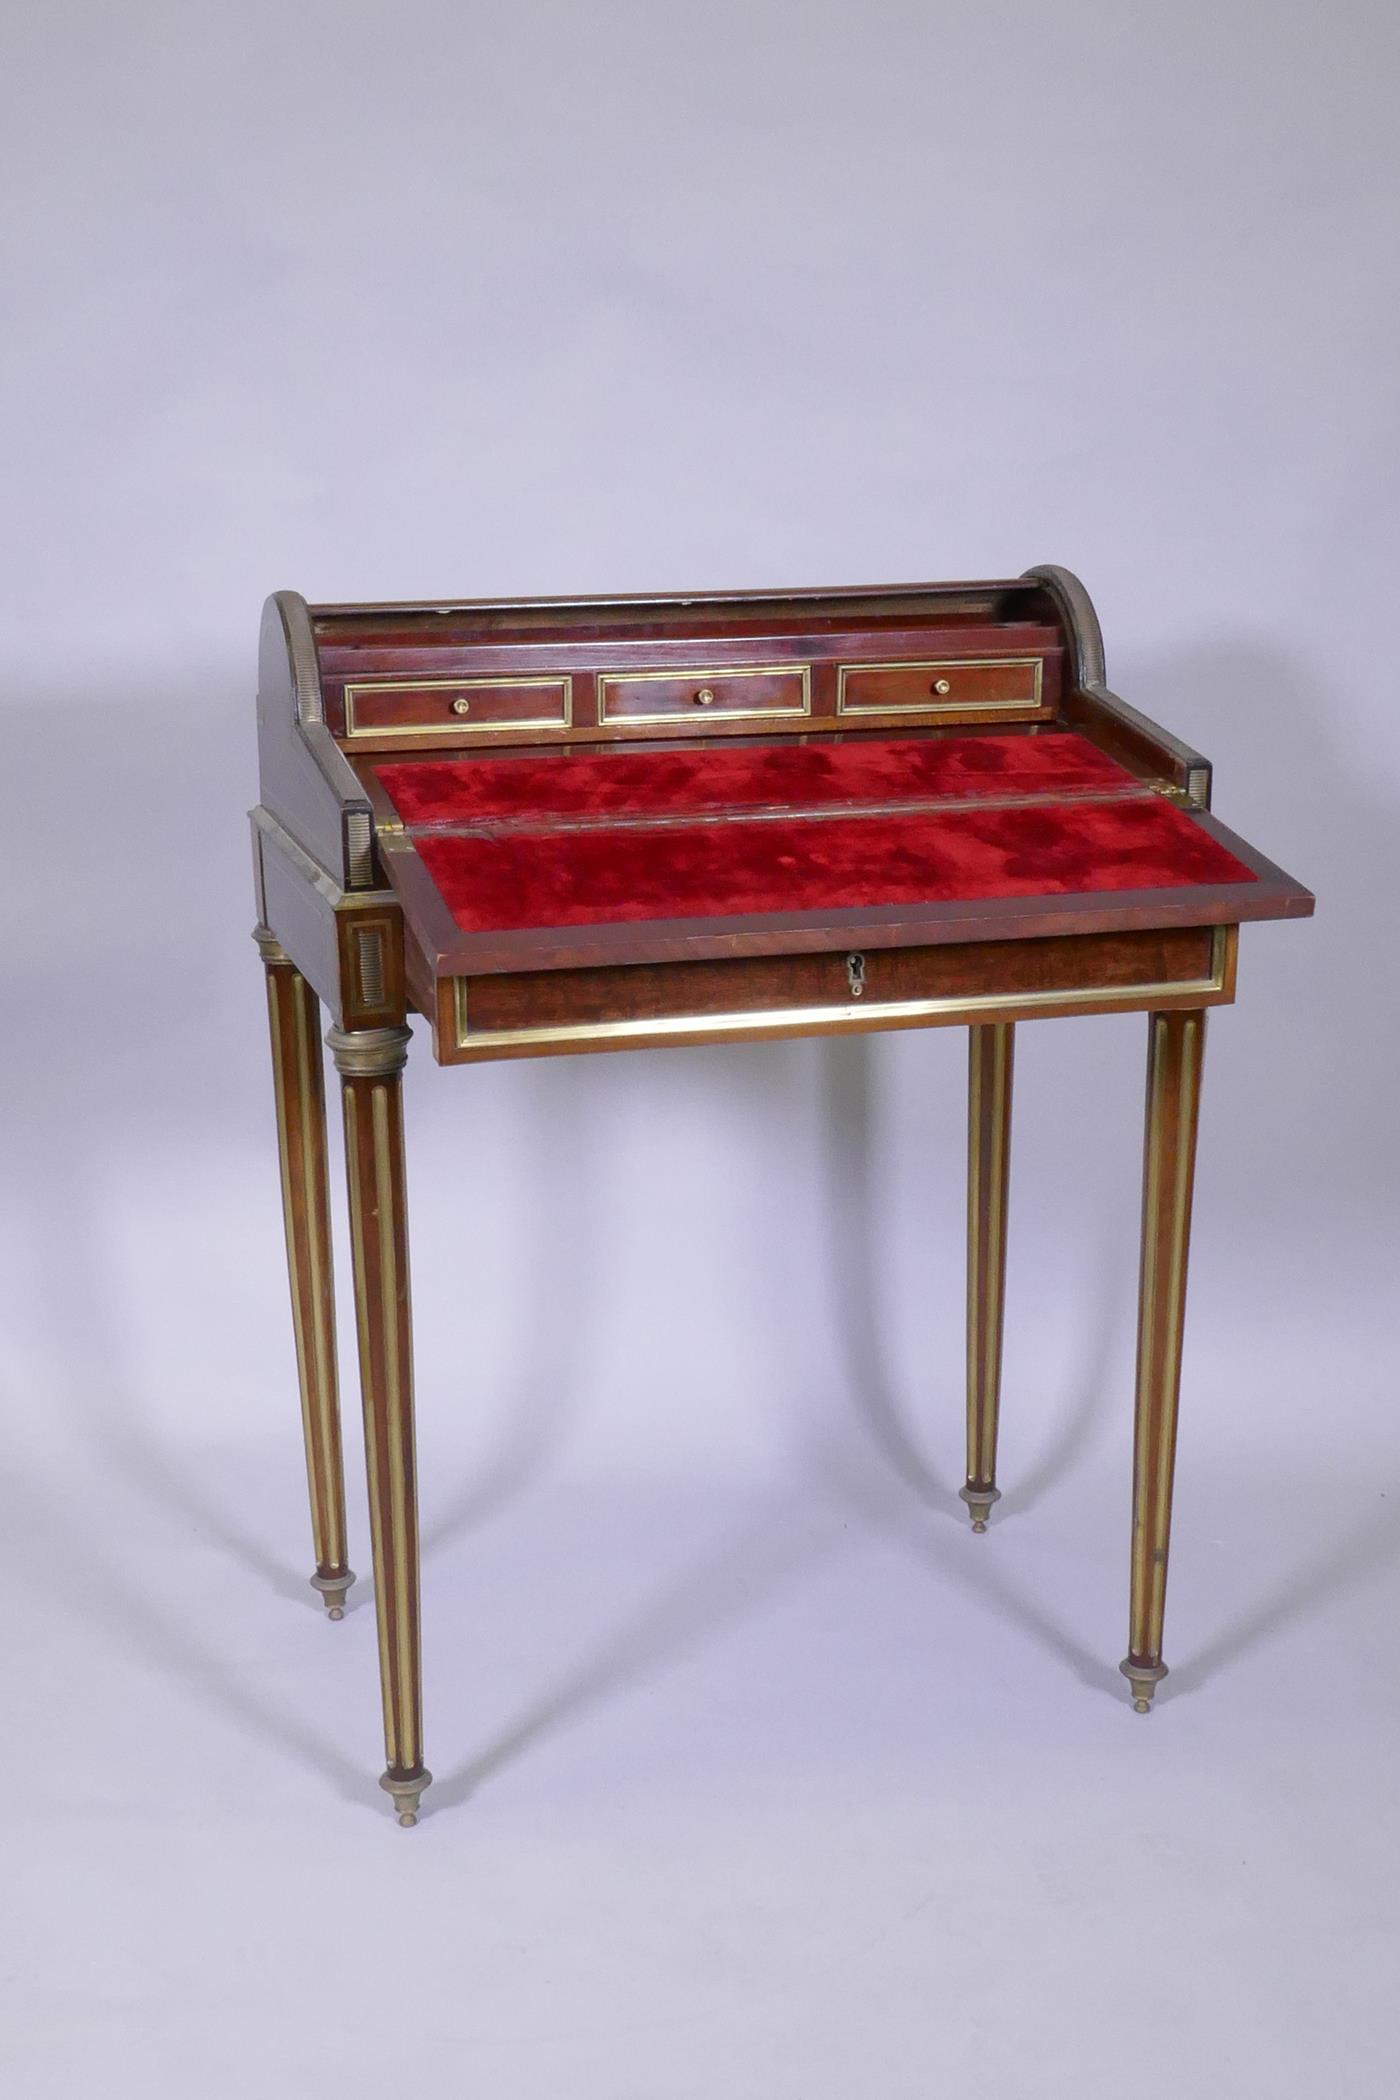 A French mahogany bonne heure du jour, with brass mounts, the pull out drawer operating the - Image 3 of 5